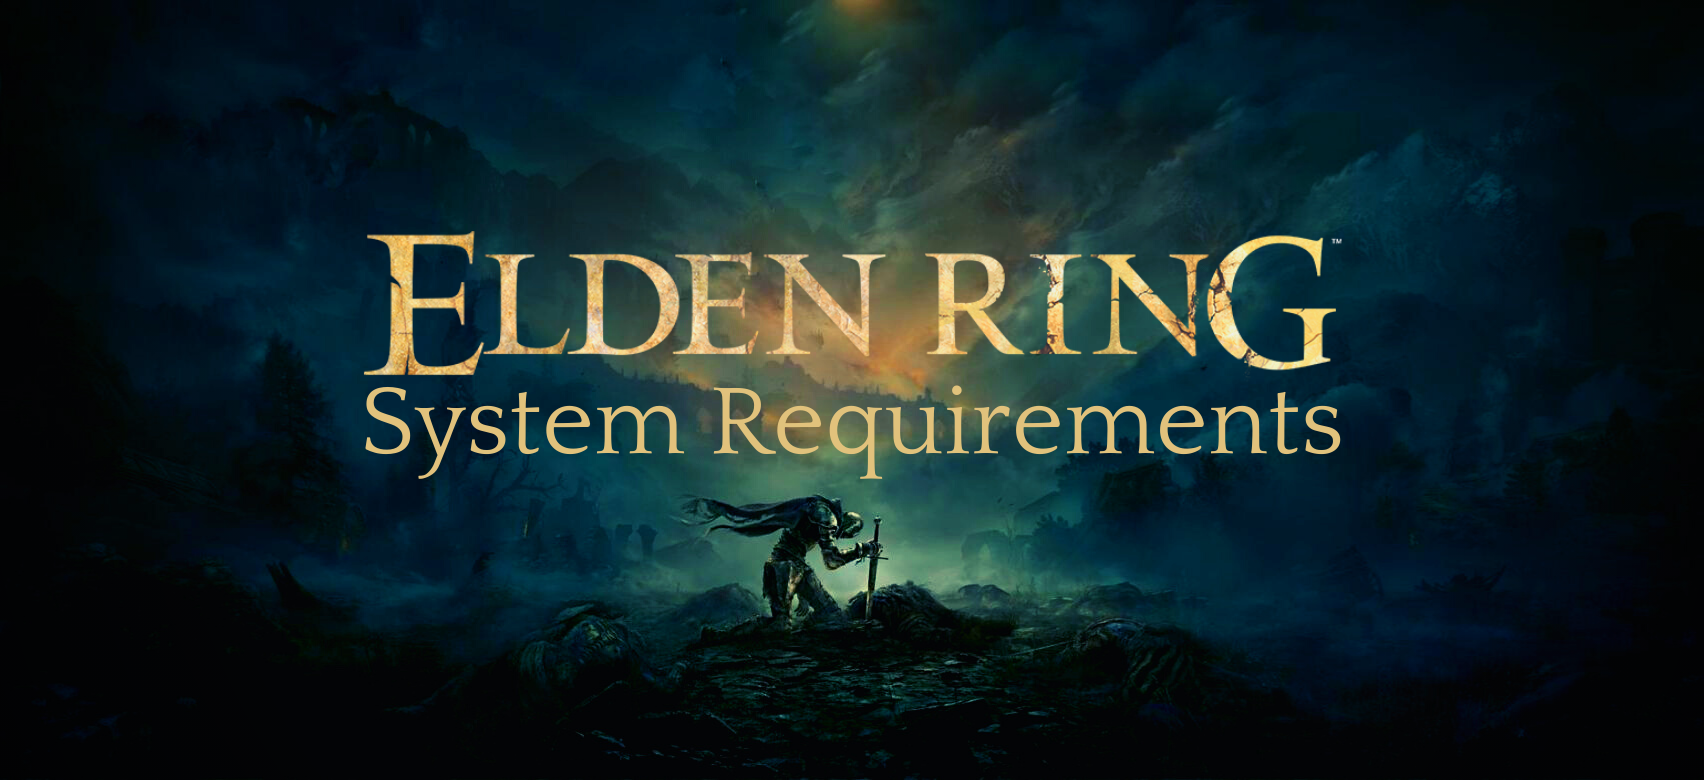 REQUIREMENTS FOR ELDEN RING SYSTEM - HERE ARE THE SPECS YOU NEED TO USE IT